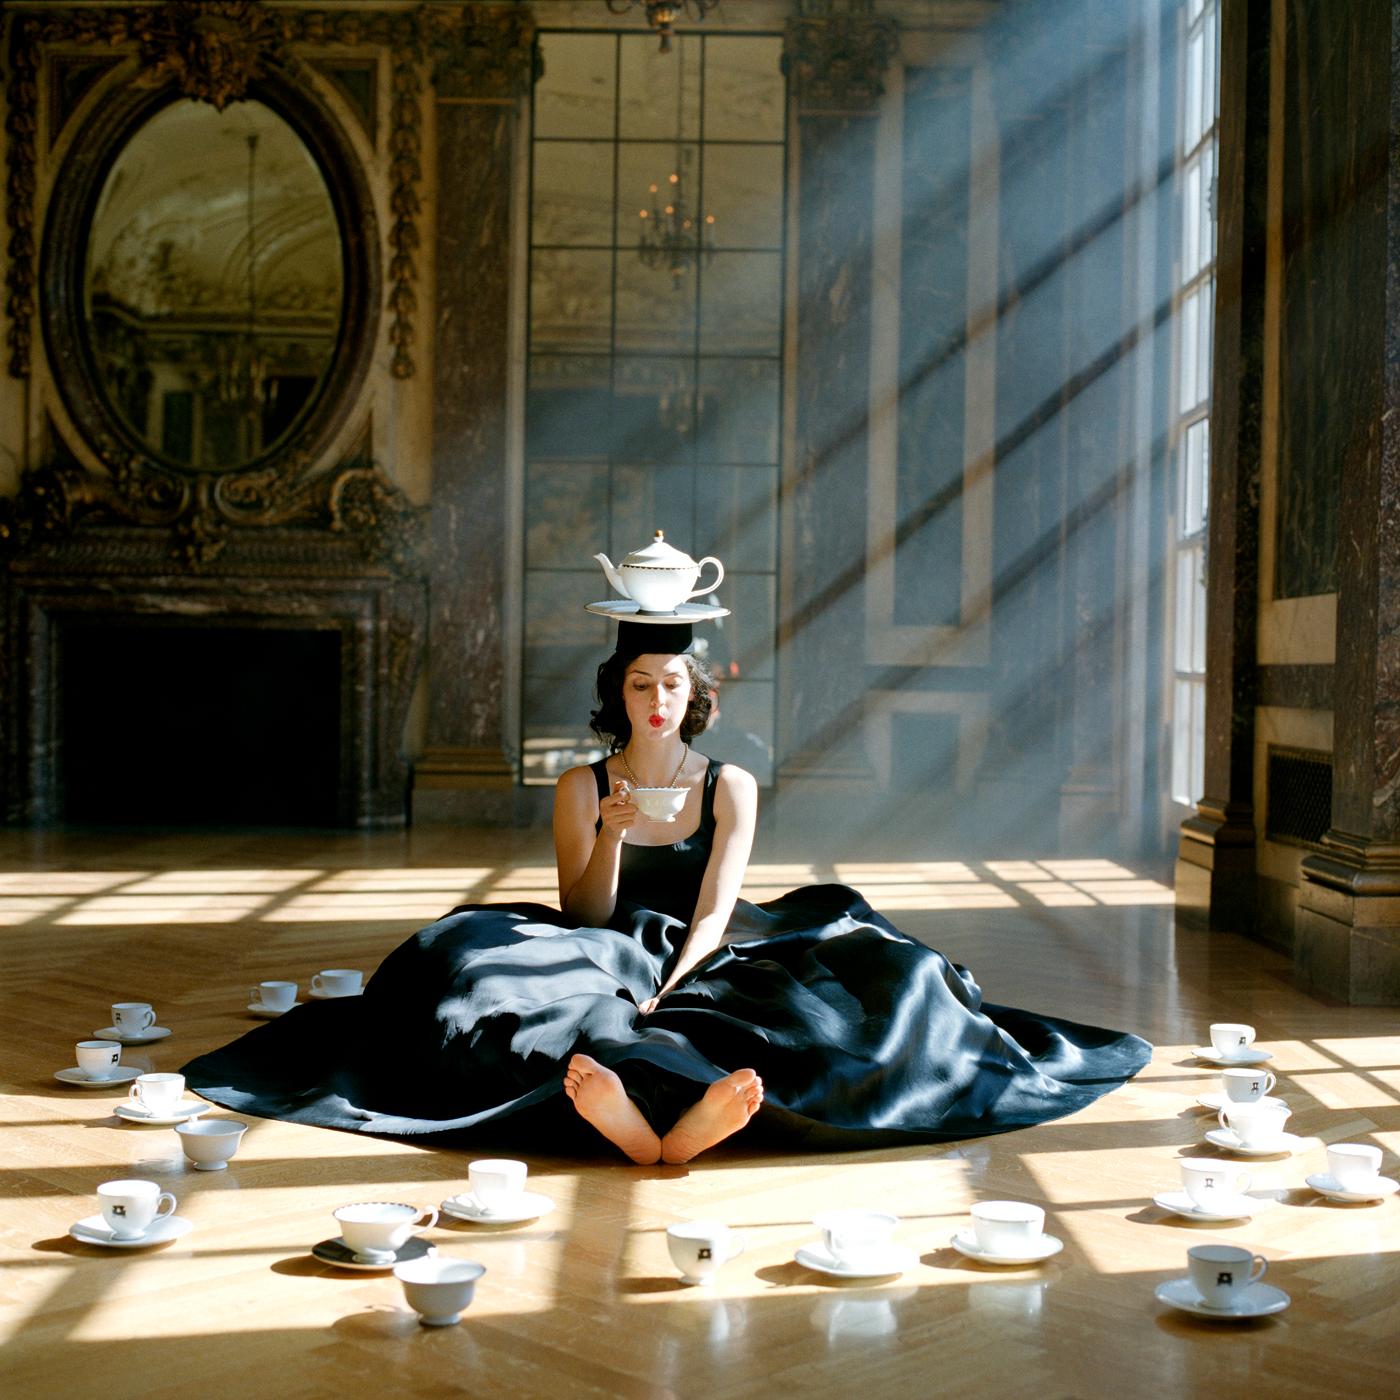 Rodney Smith Color Photograph - Zoe Balancing Teapot on Head, Burden Mansion, NY - 50 x 50 inches framed